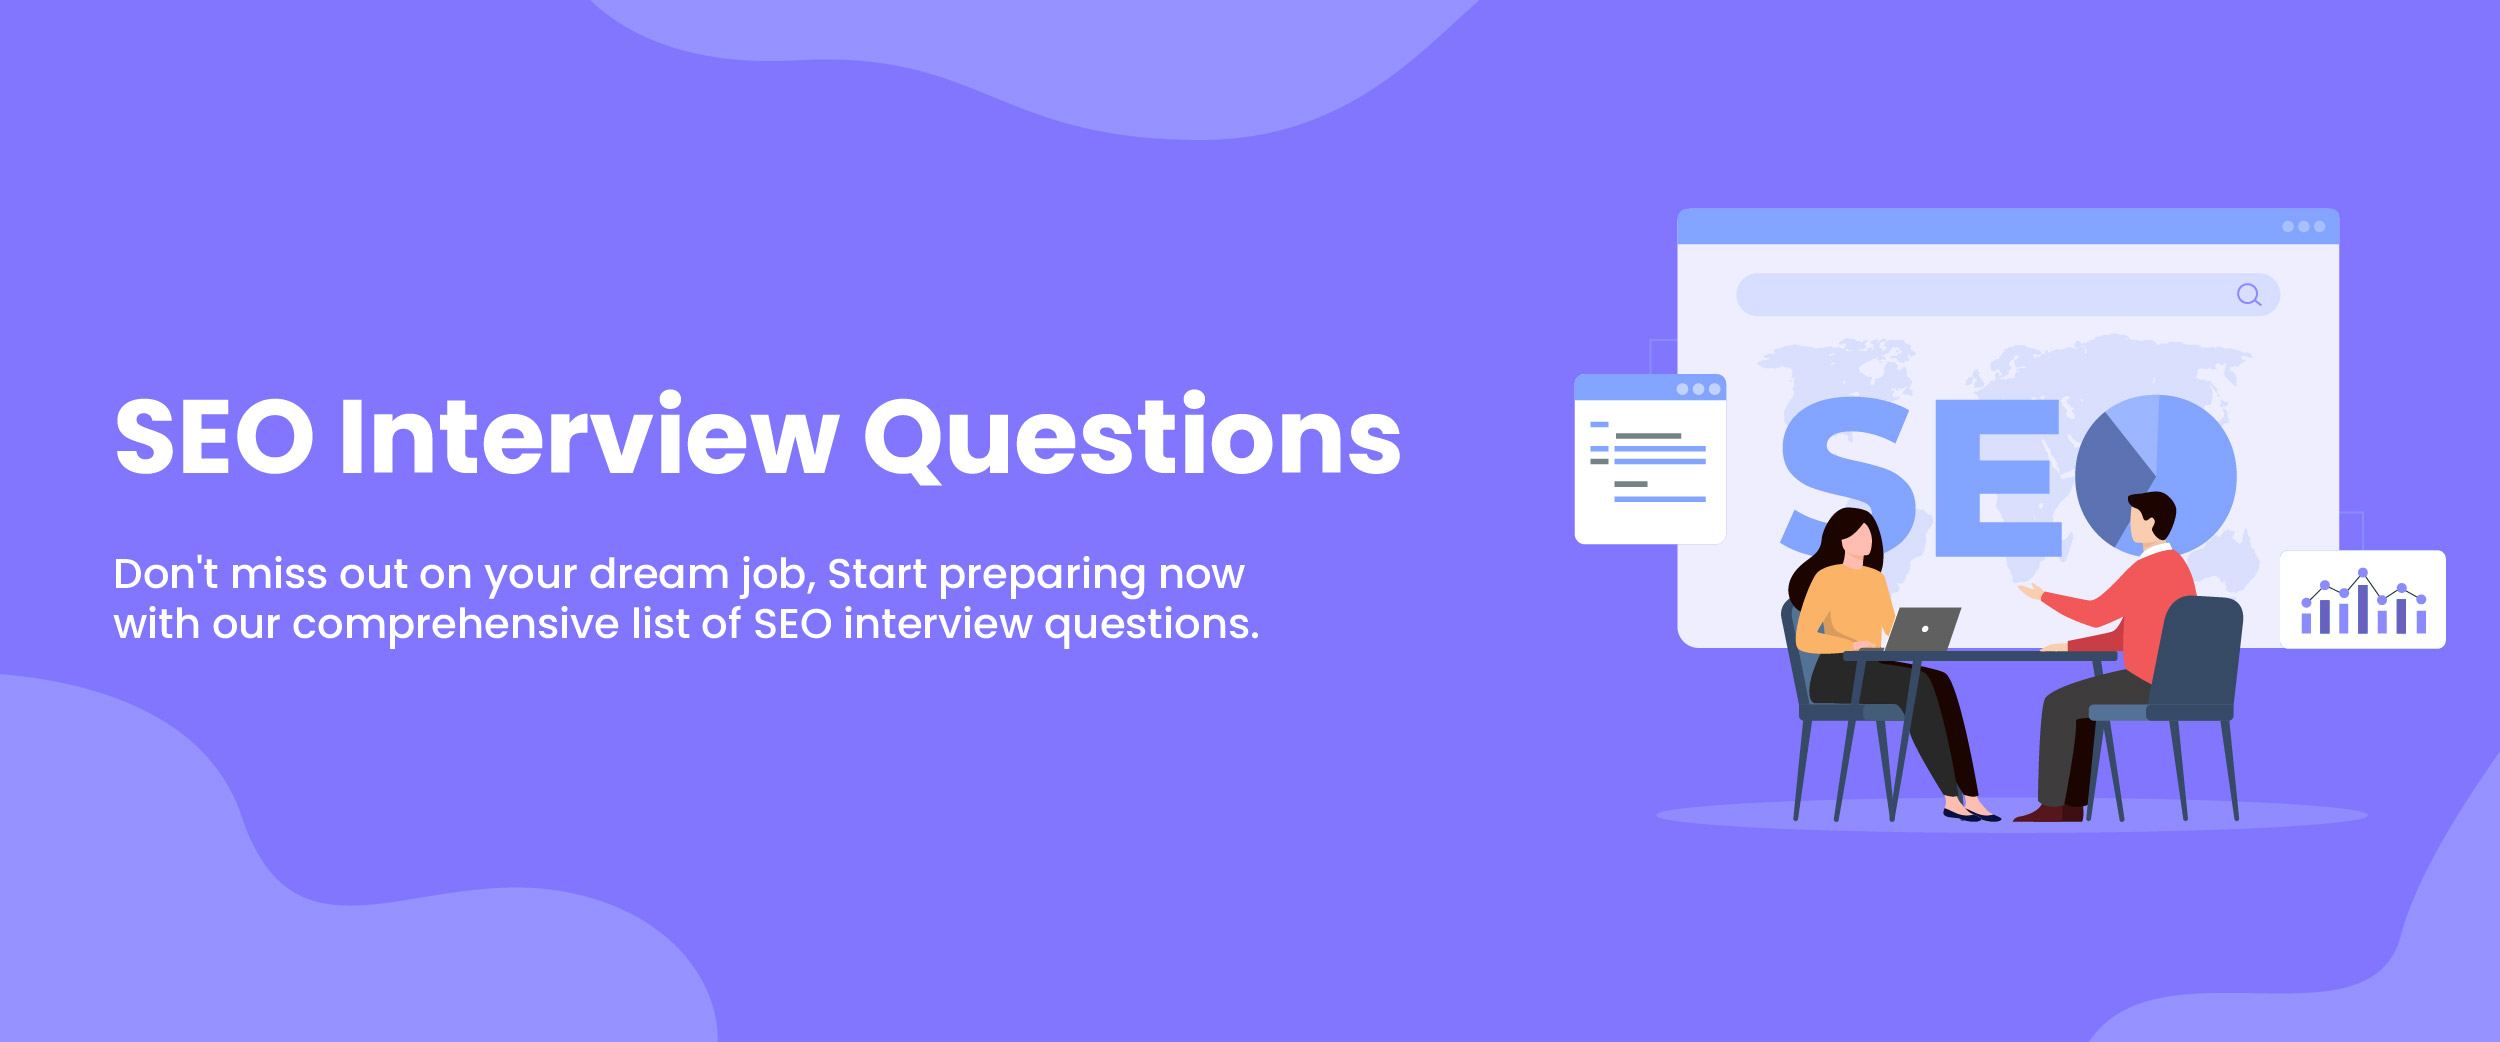 SEO interview questions